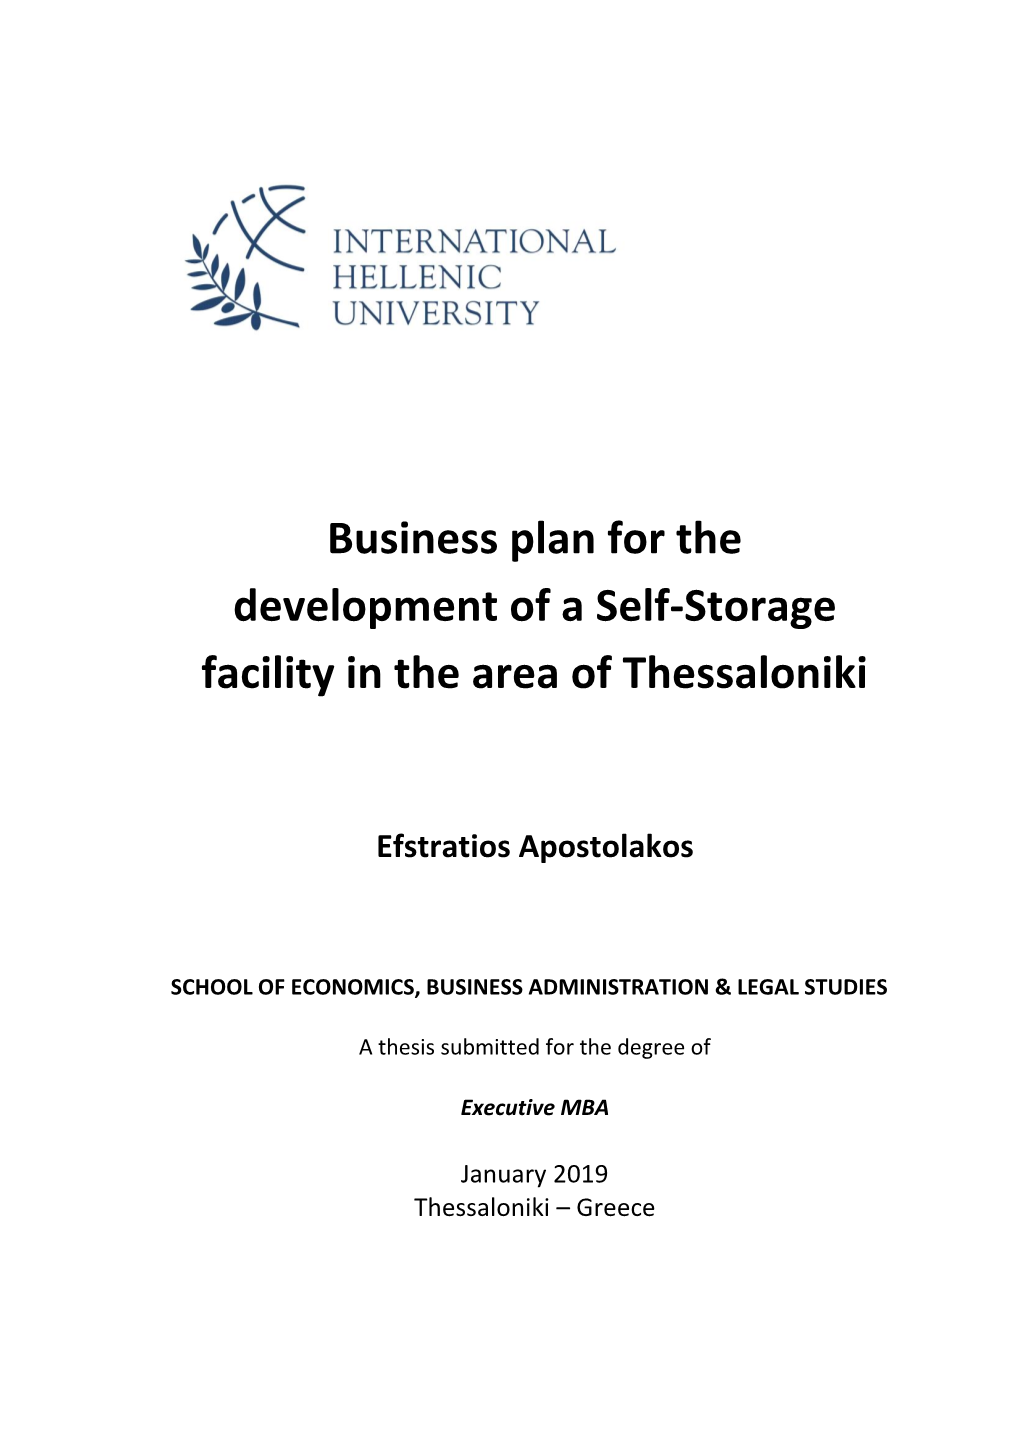 Business Plan for the Development of a Self-Storage Facility in the Area of Thessaloniki